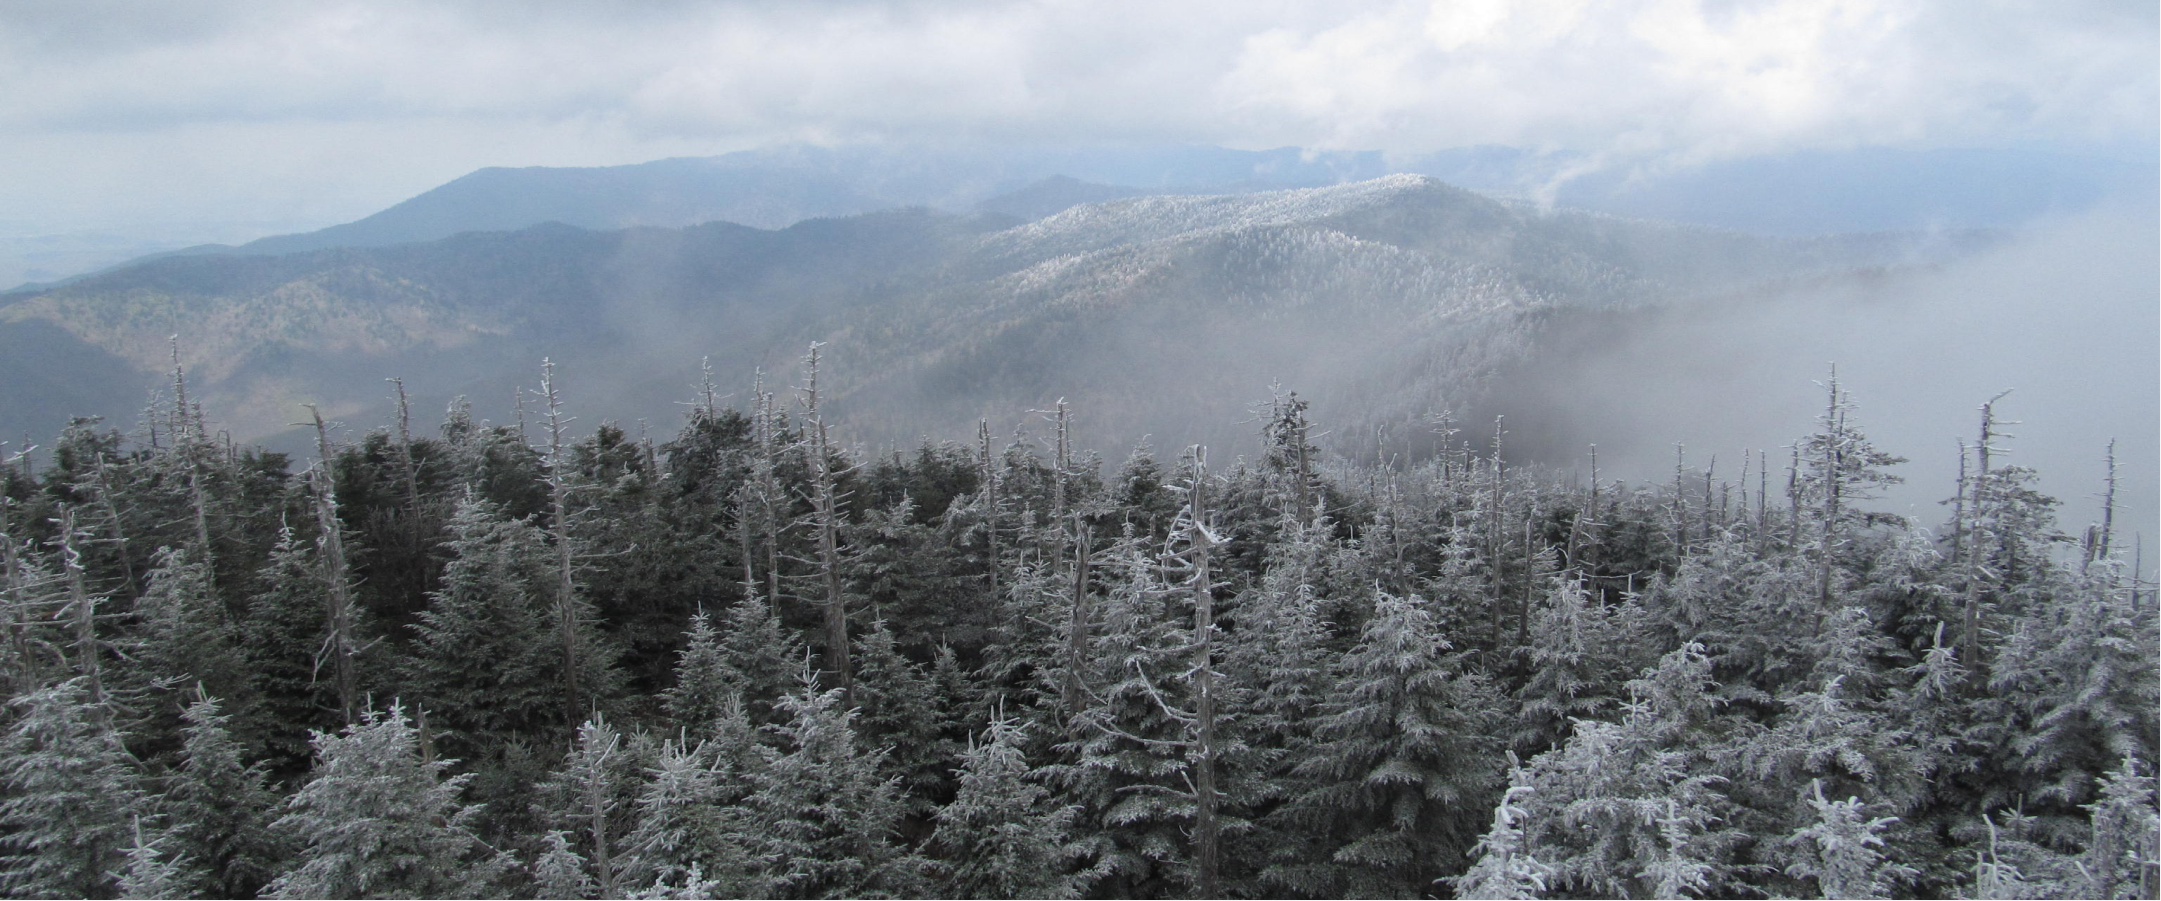 Frosted trees in the moutains